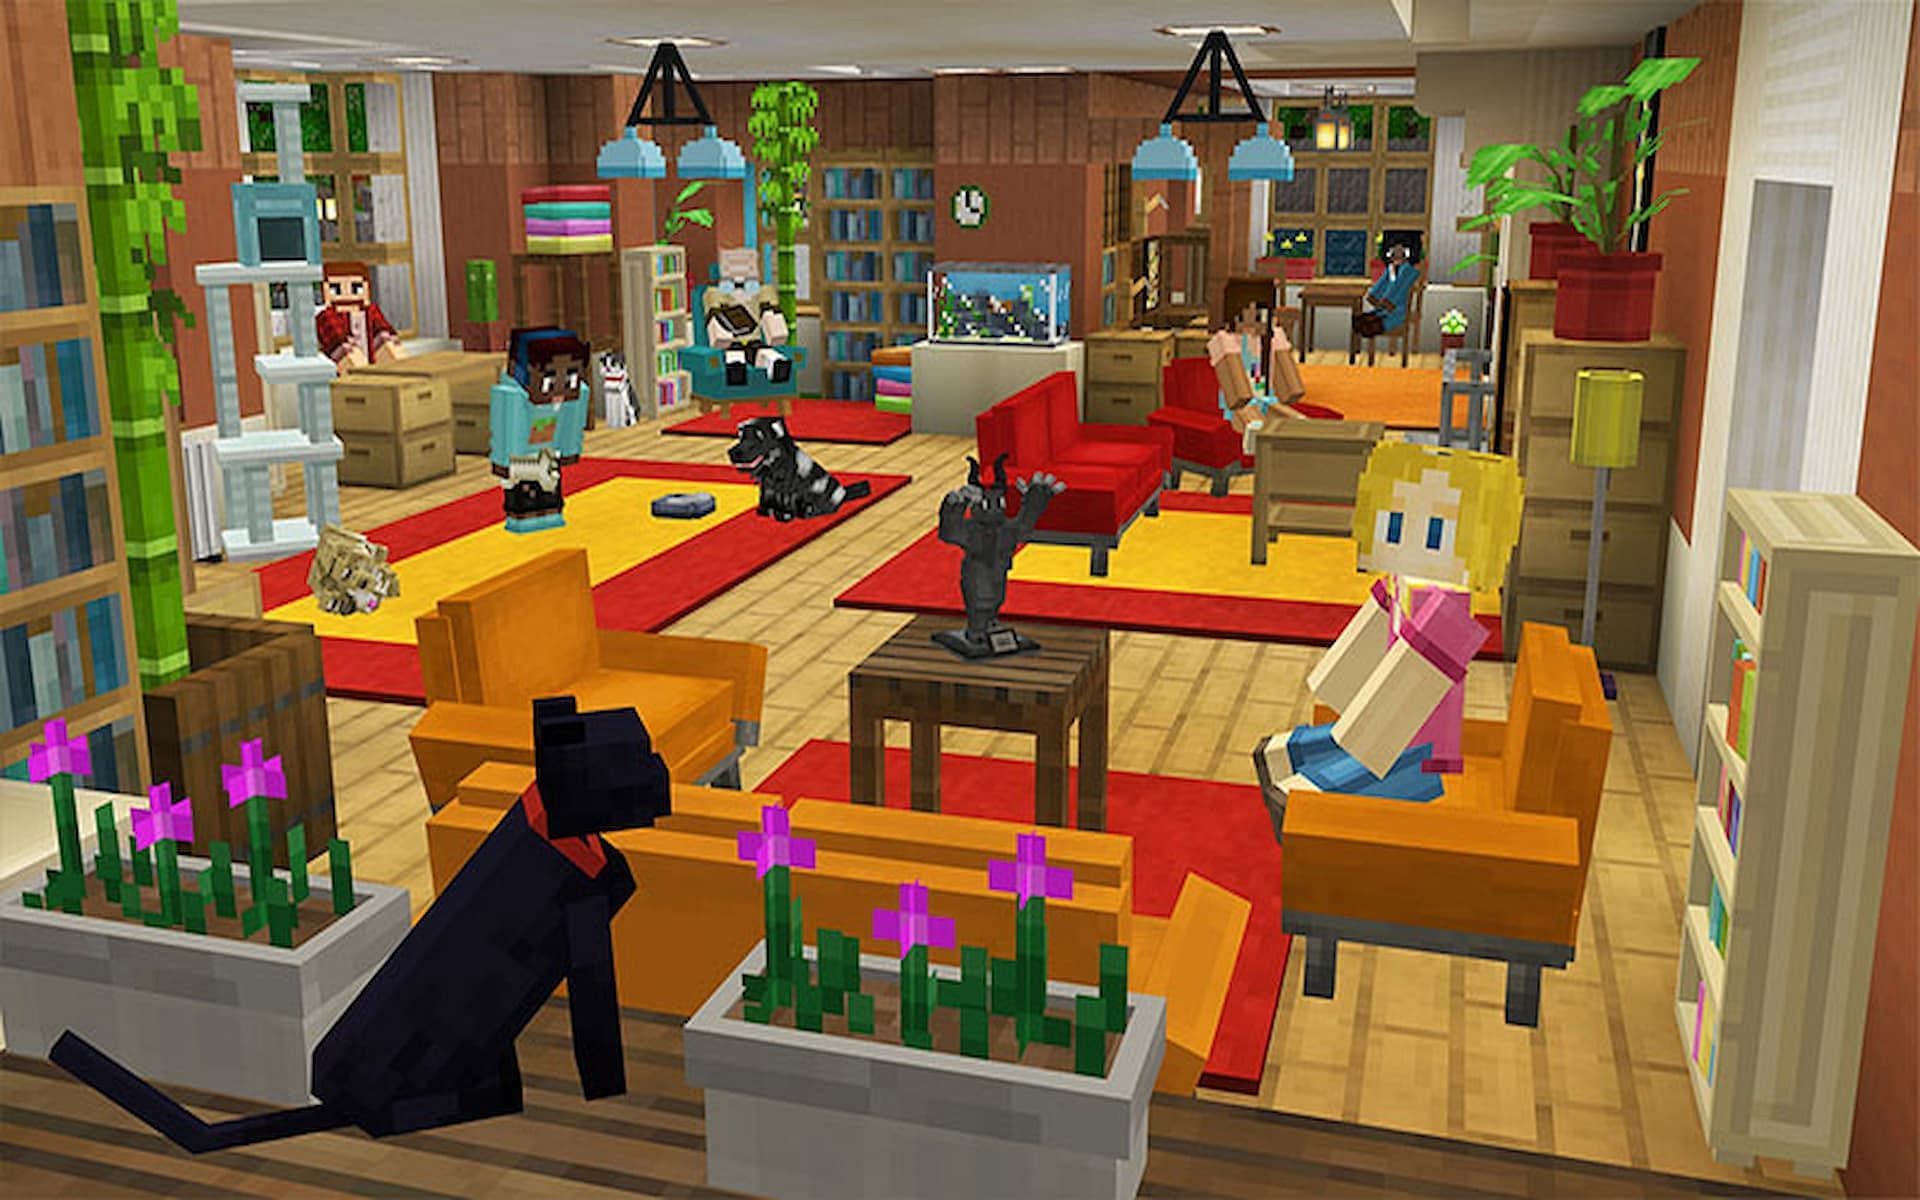 Family-friendly YouTubers can help to introduce children to Minecraft (Image via Minecraft.net)